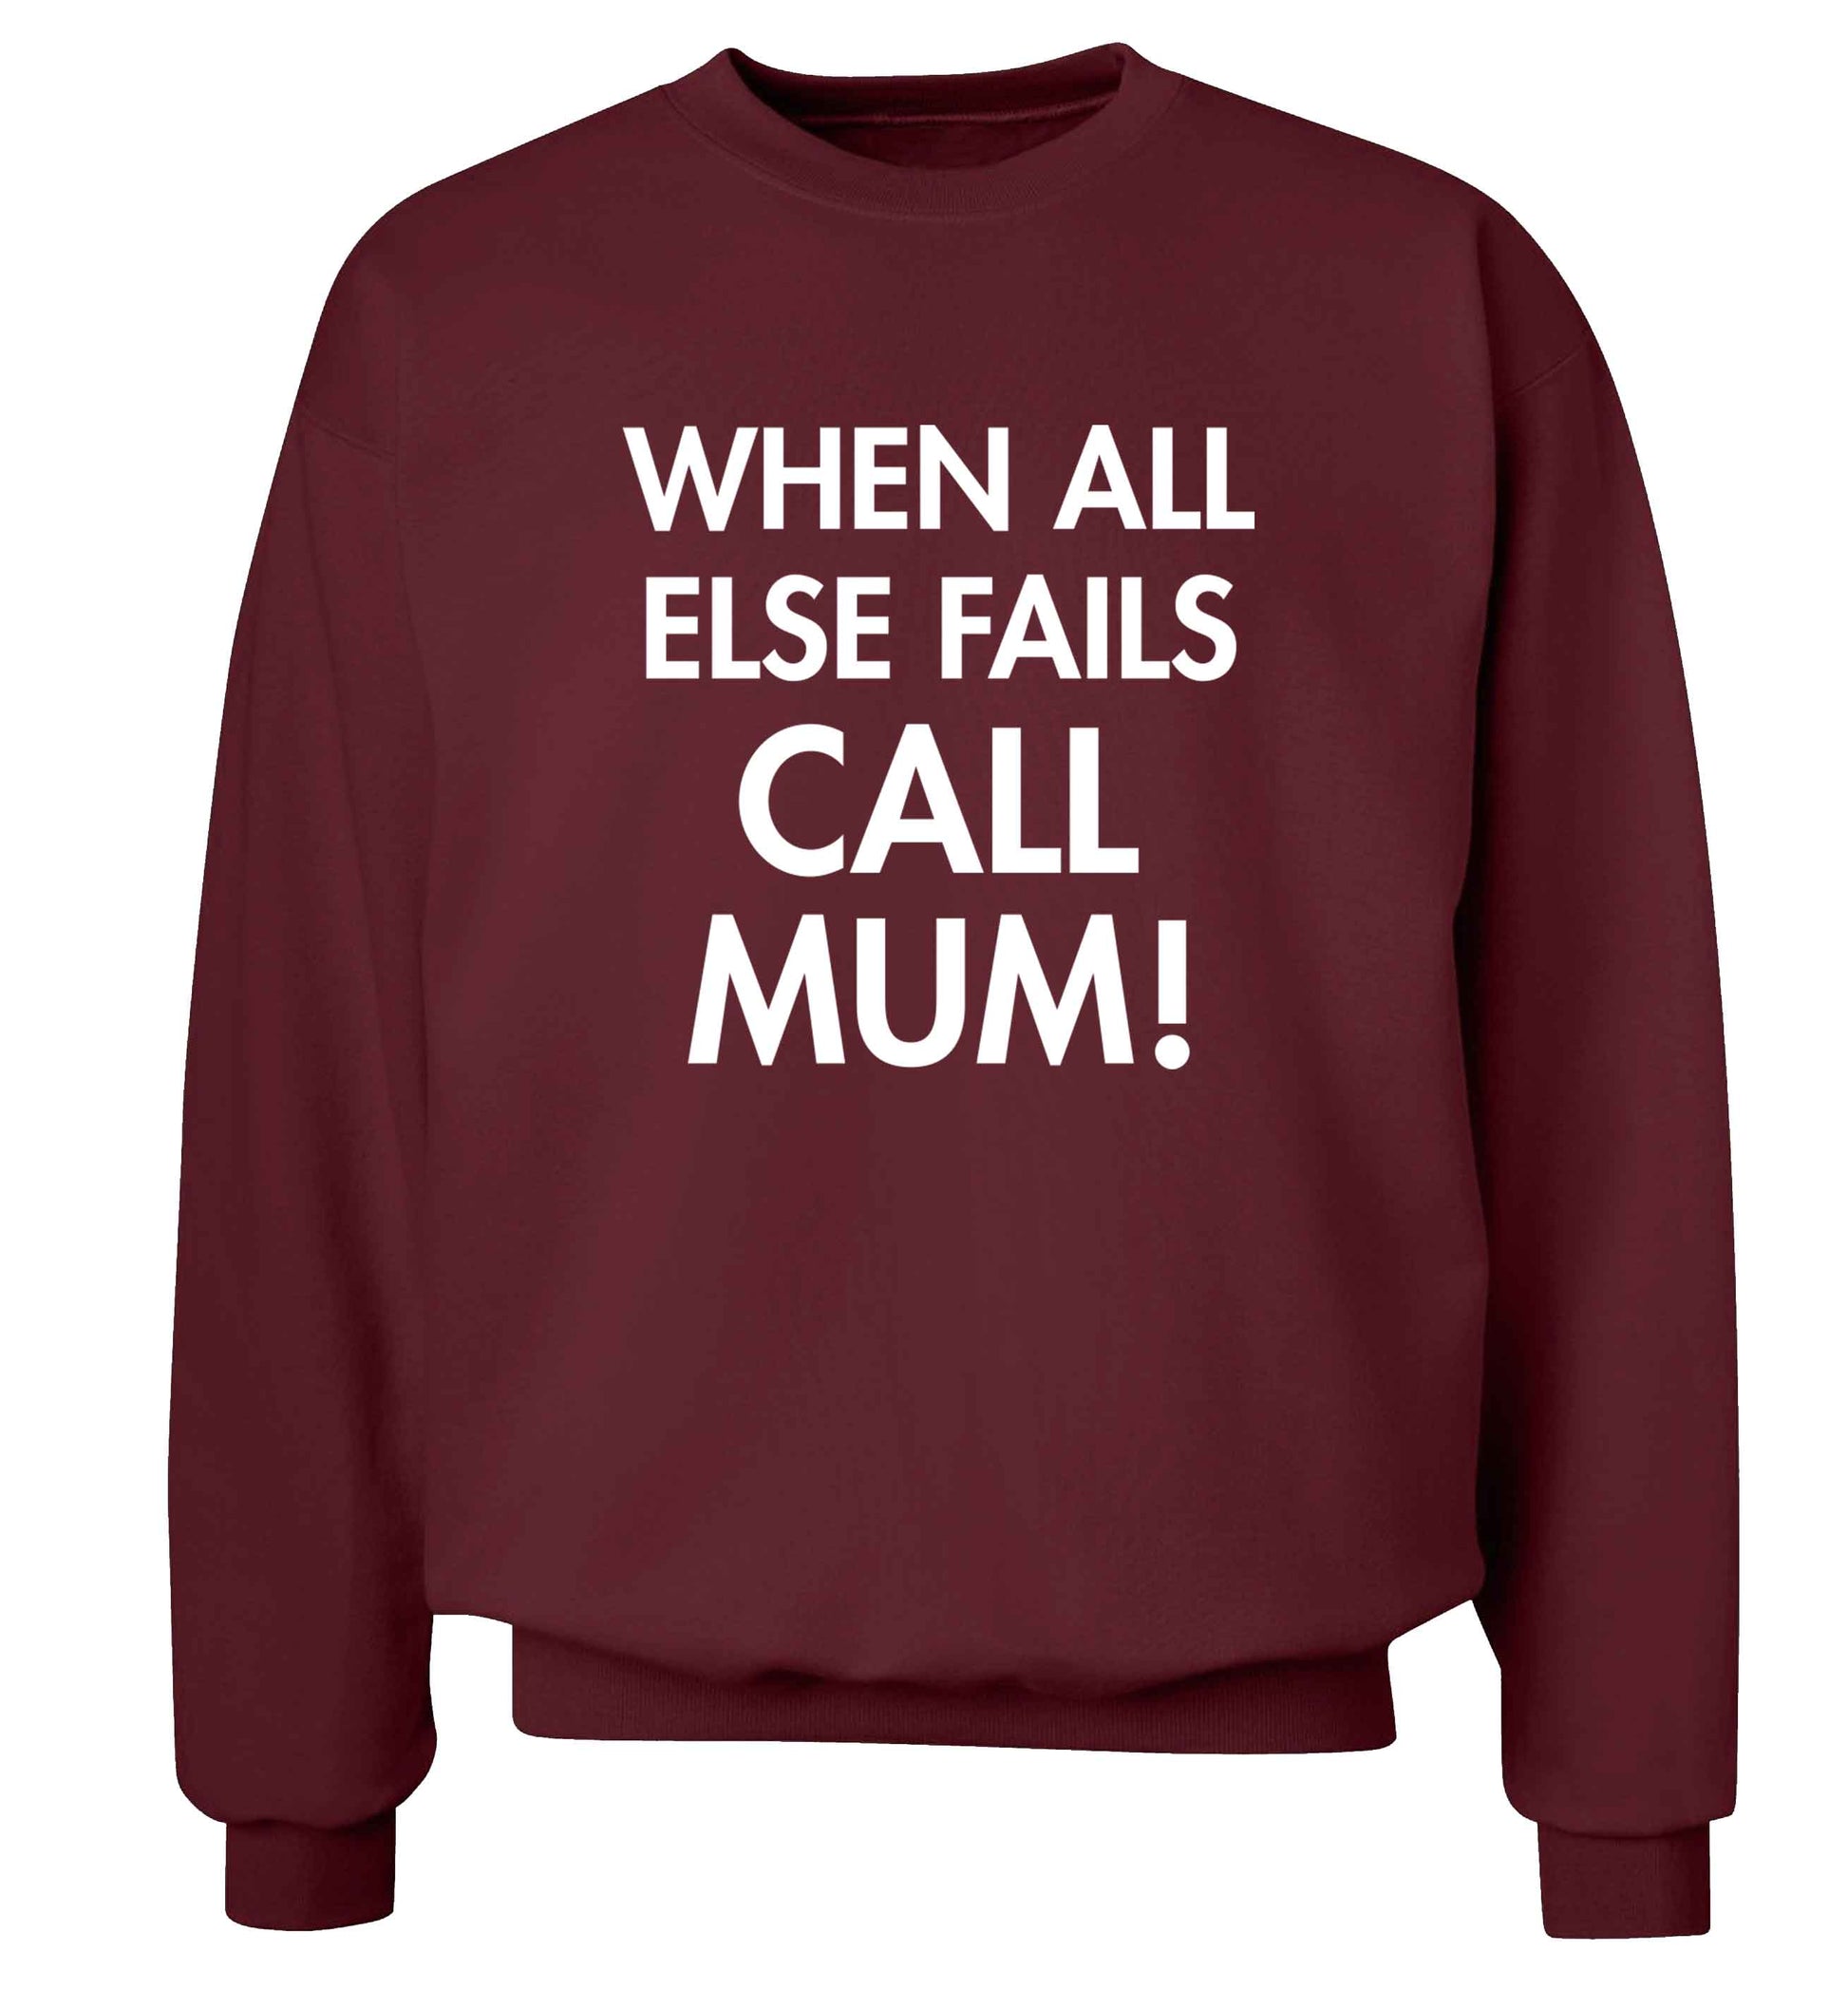 When all else fails call mum! adult's unisex maroon sweater 2XL